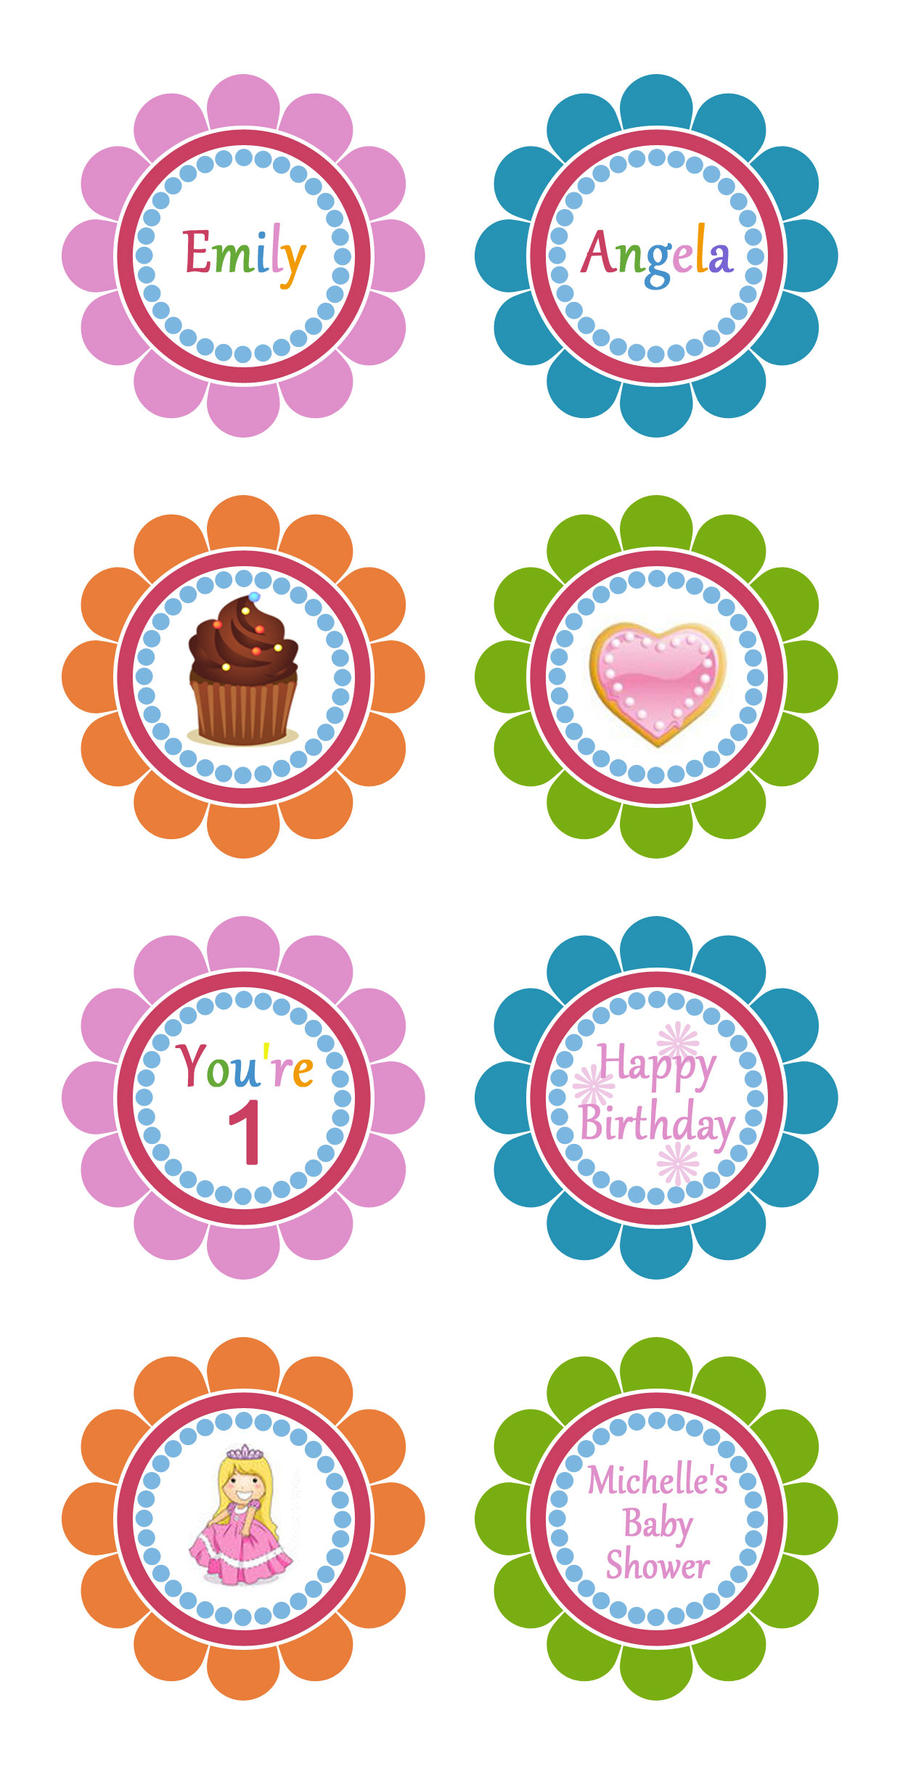 cupcake-toppers-template-by-danbradster-on-deviantart